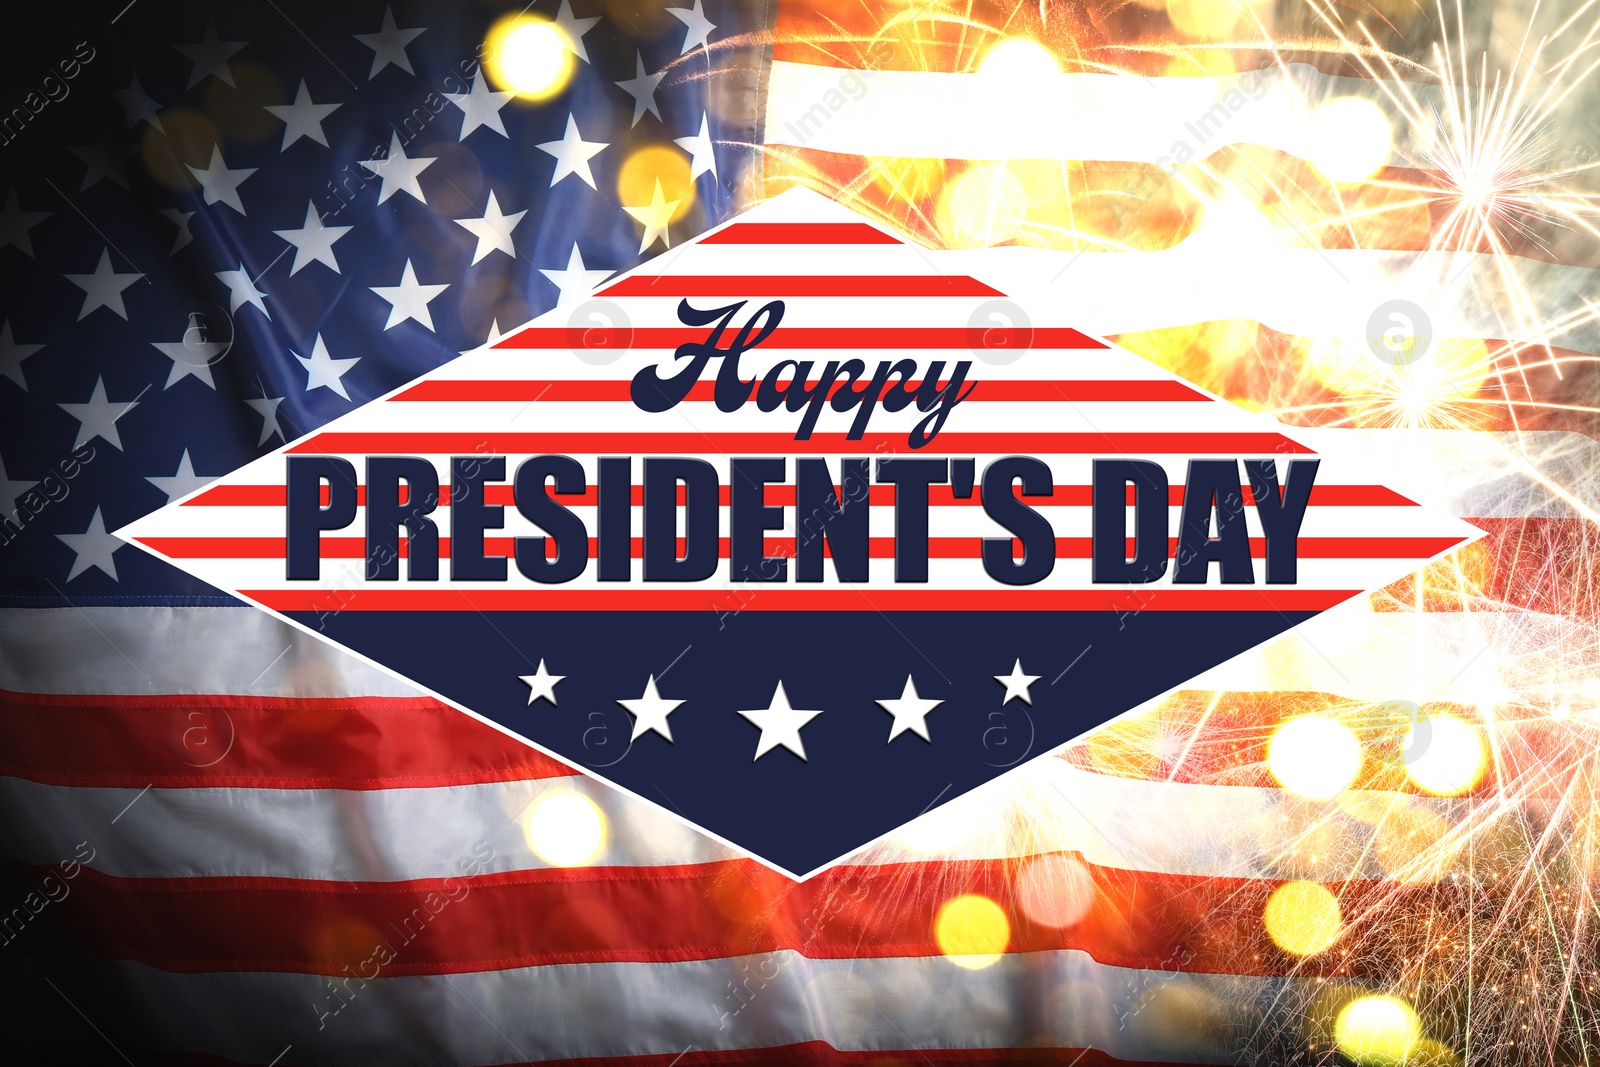 Image of Happy President's Day - federal holiday. National American flag and fireworks, bokeh effect